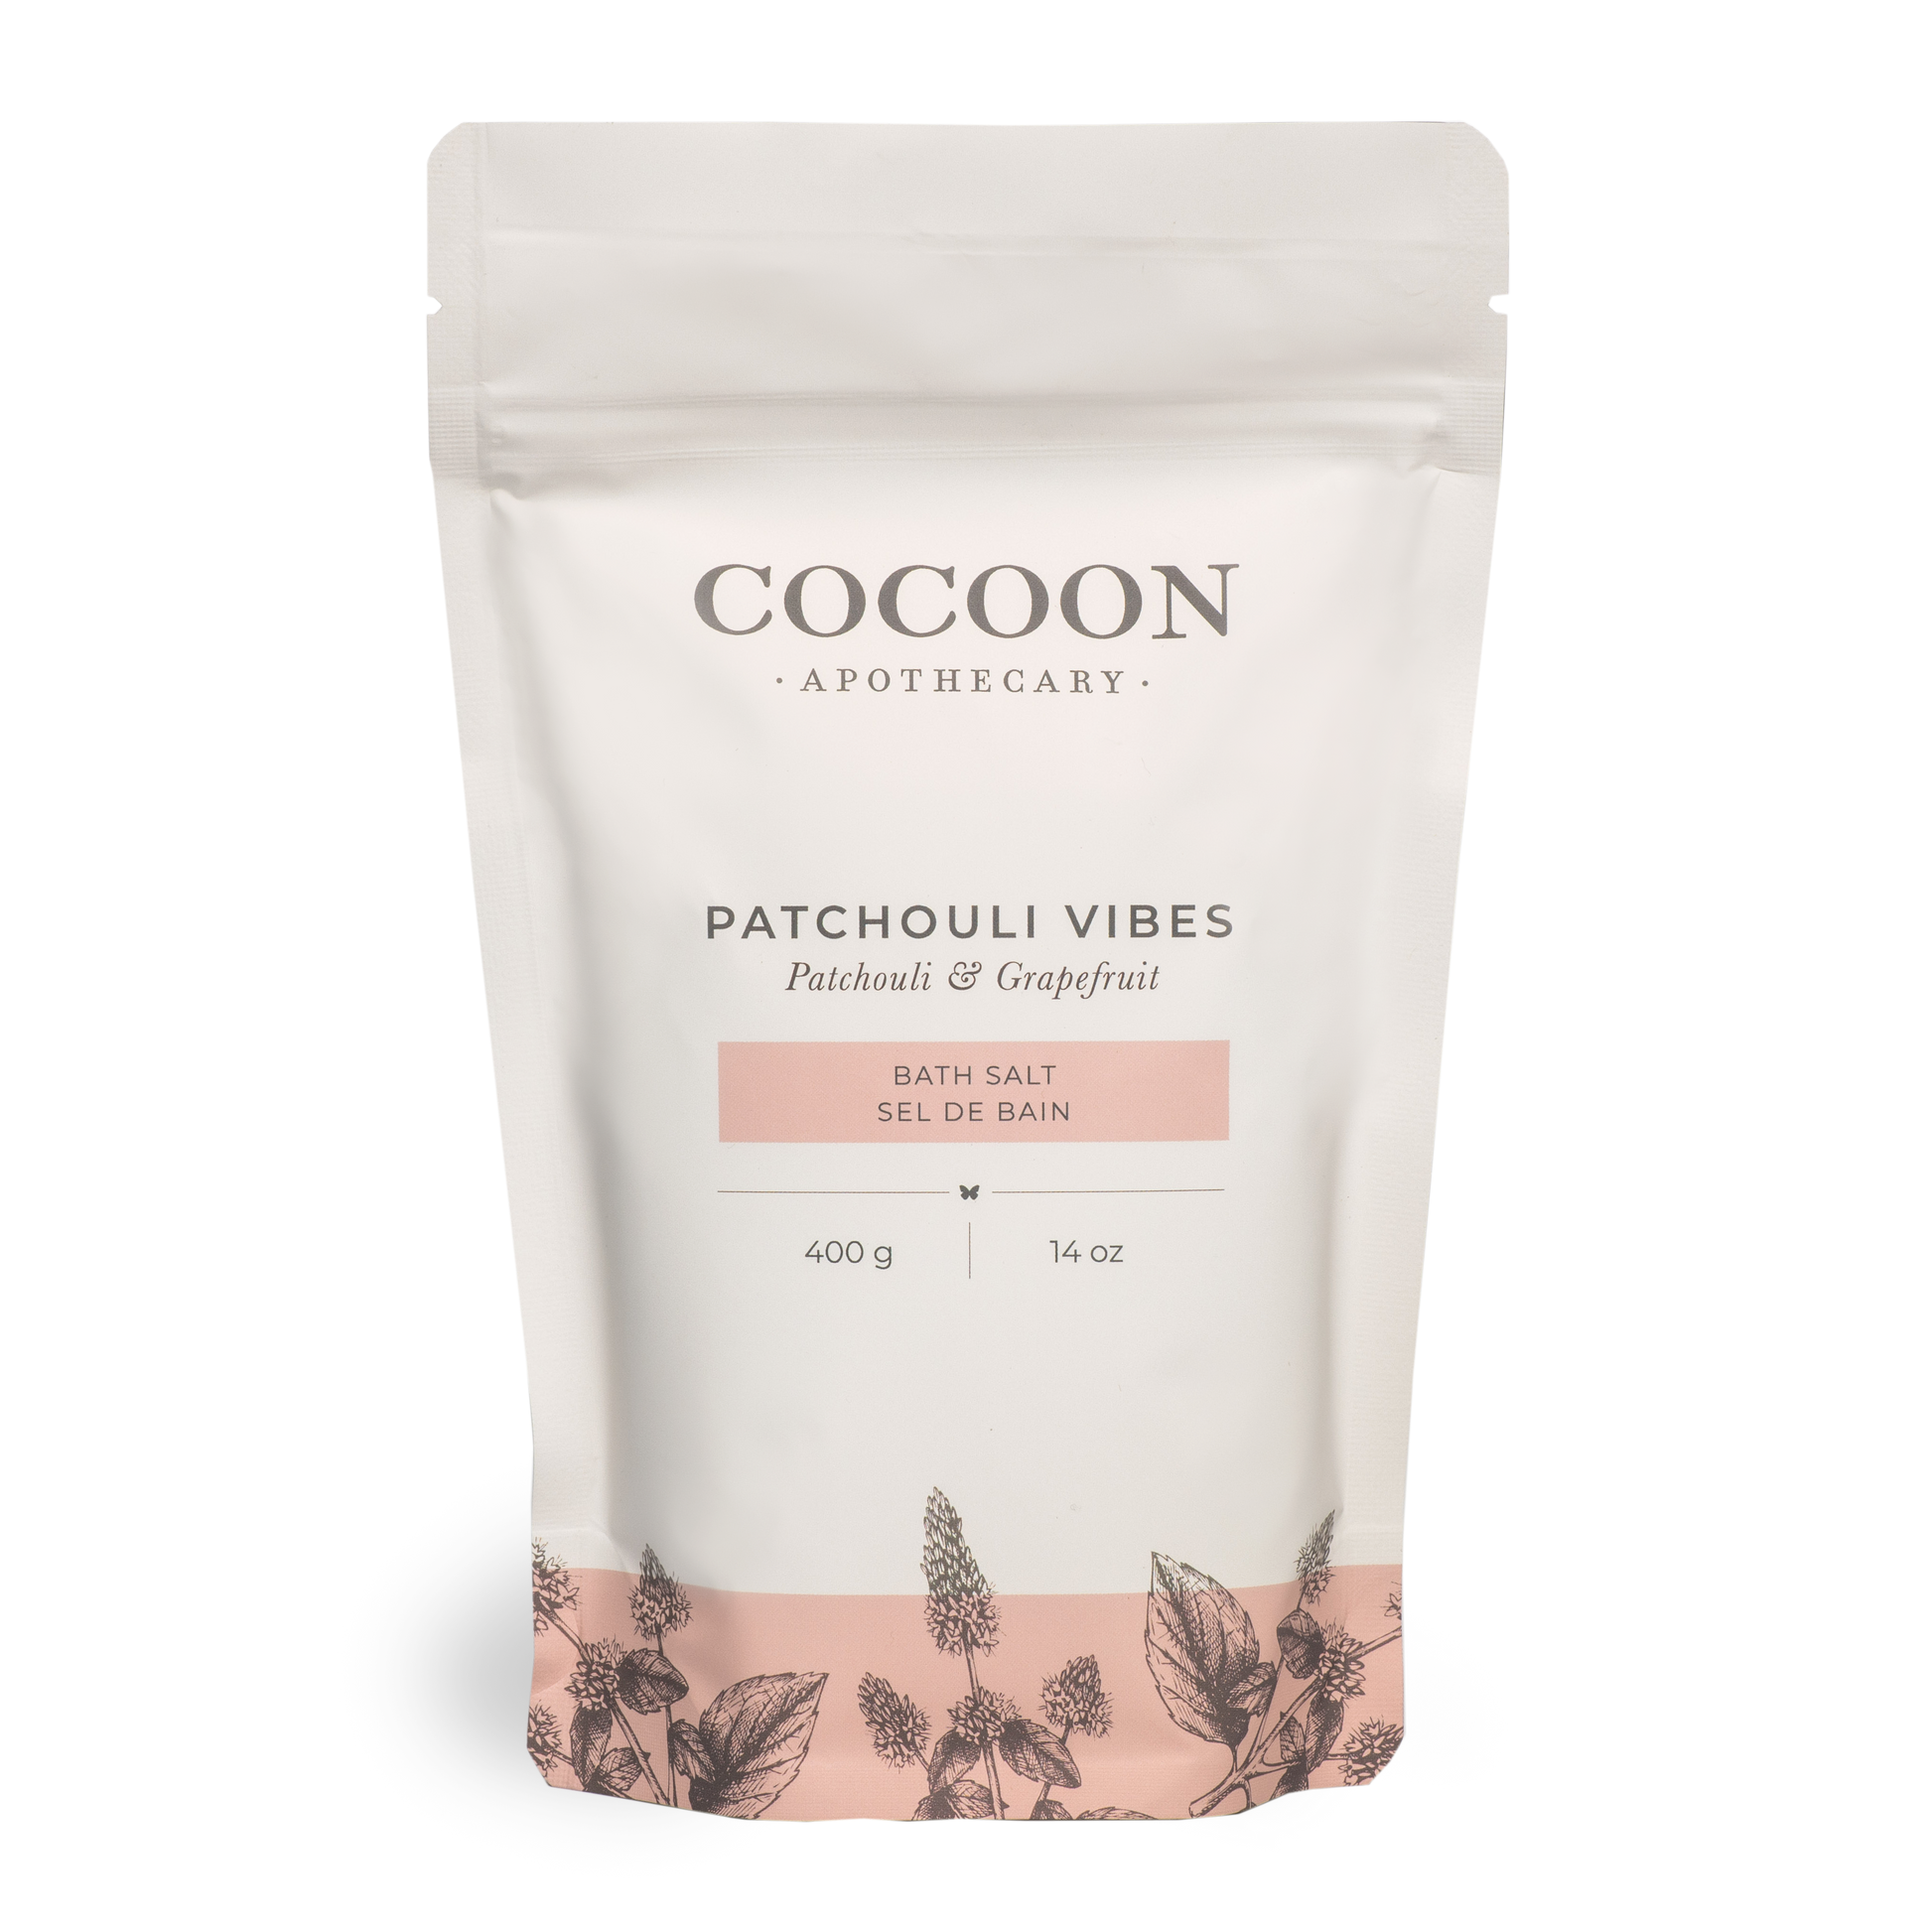 Mineral rich Dead Sea salts, Epsom salts and pure essential oils creates a spa-like bathing experience. Patchouli Vibes is a relaxing, grounding scent with a sweet note.